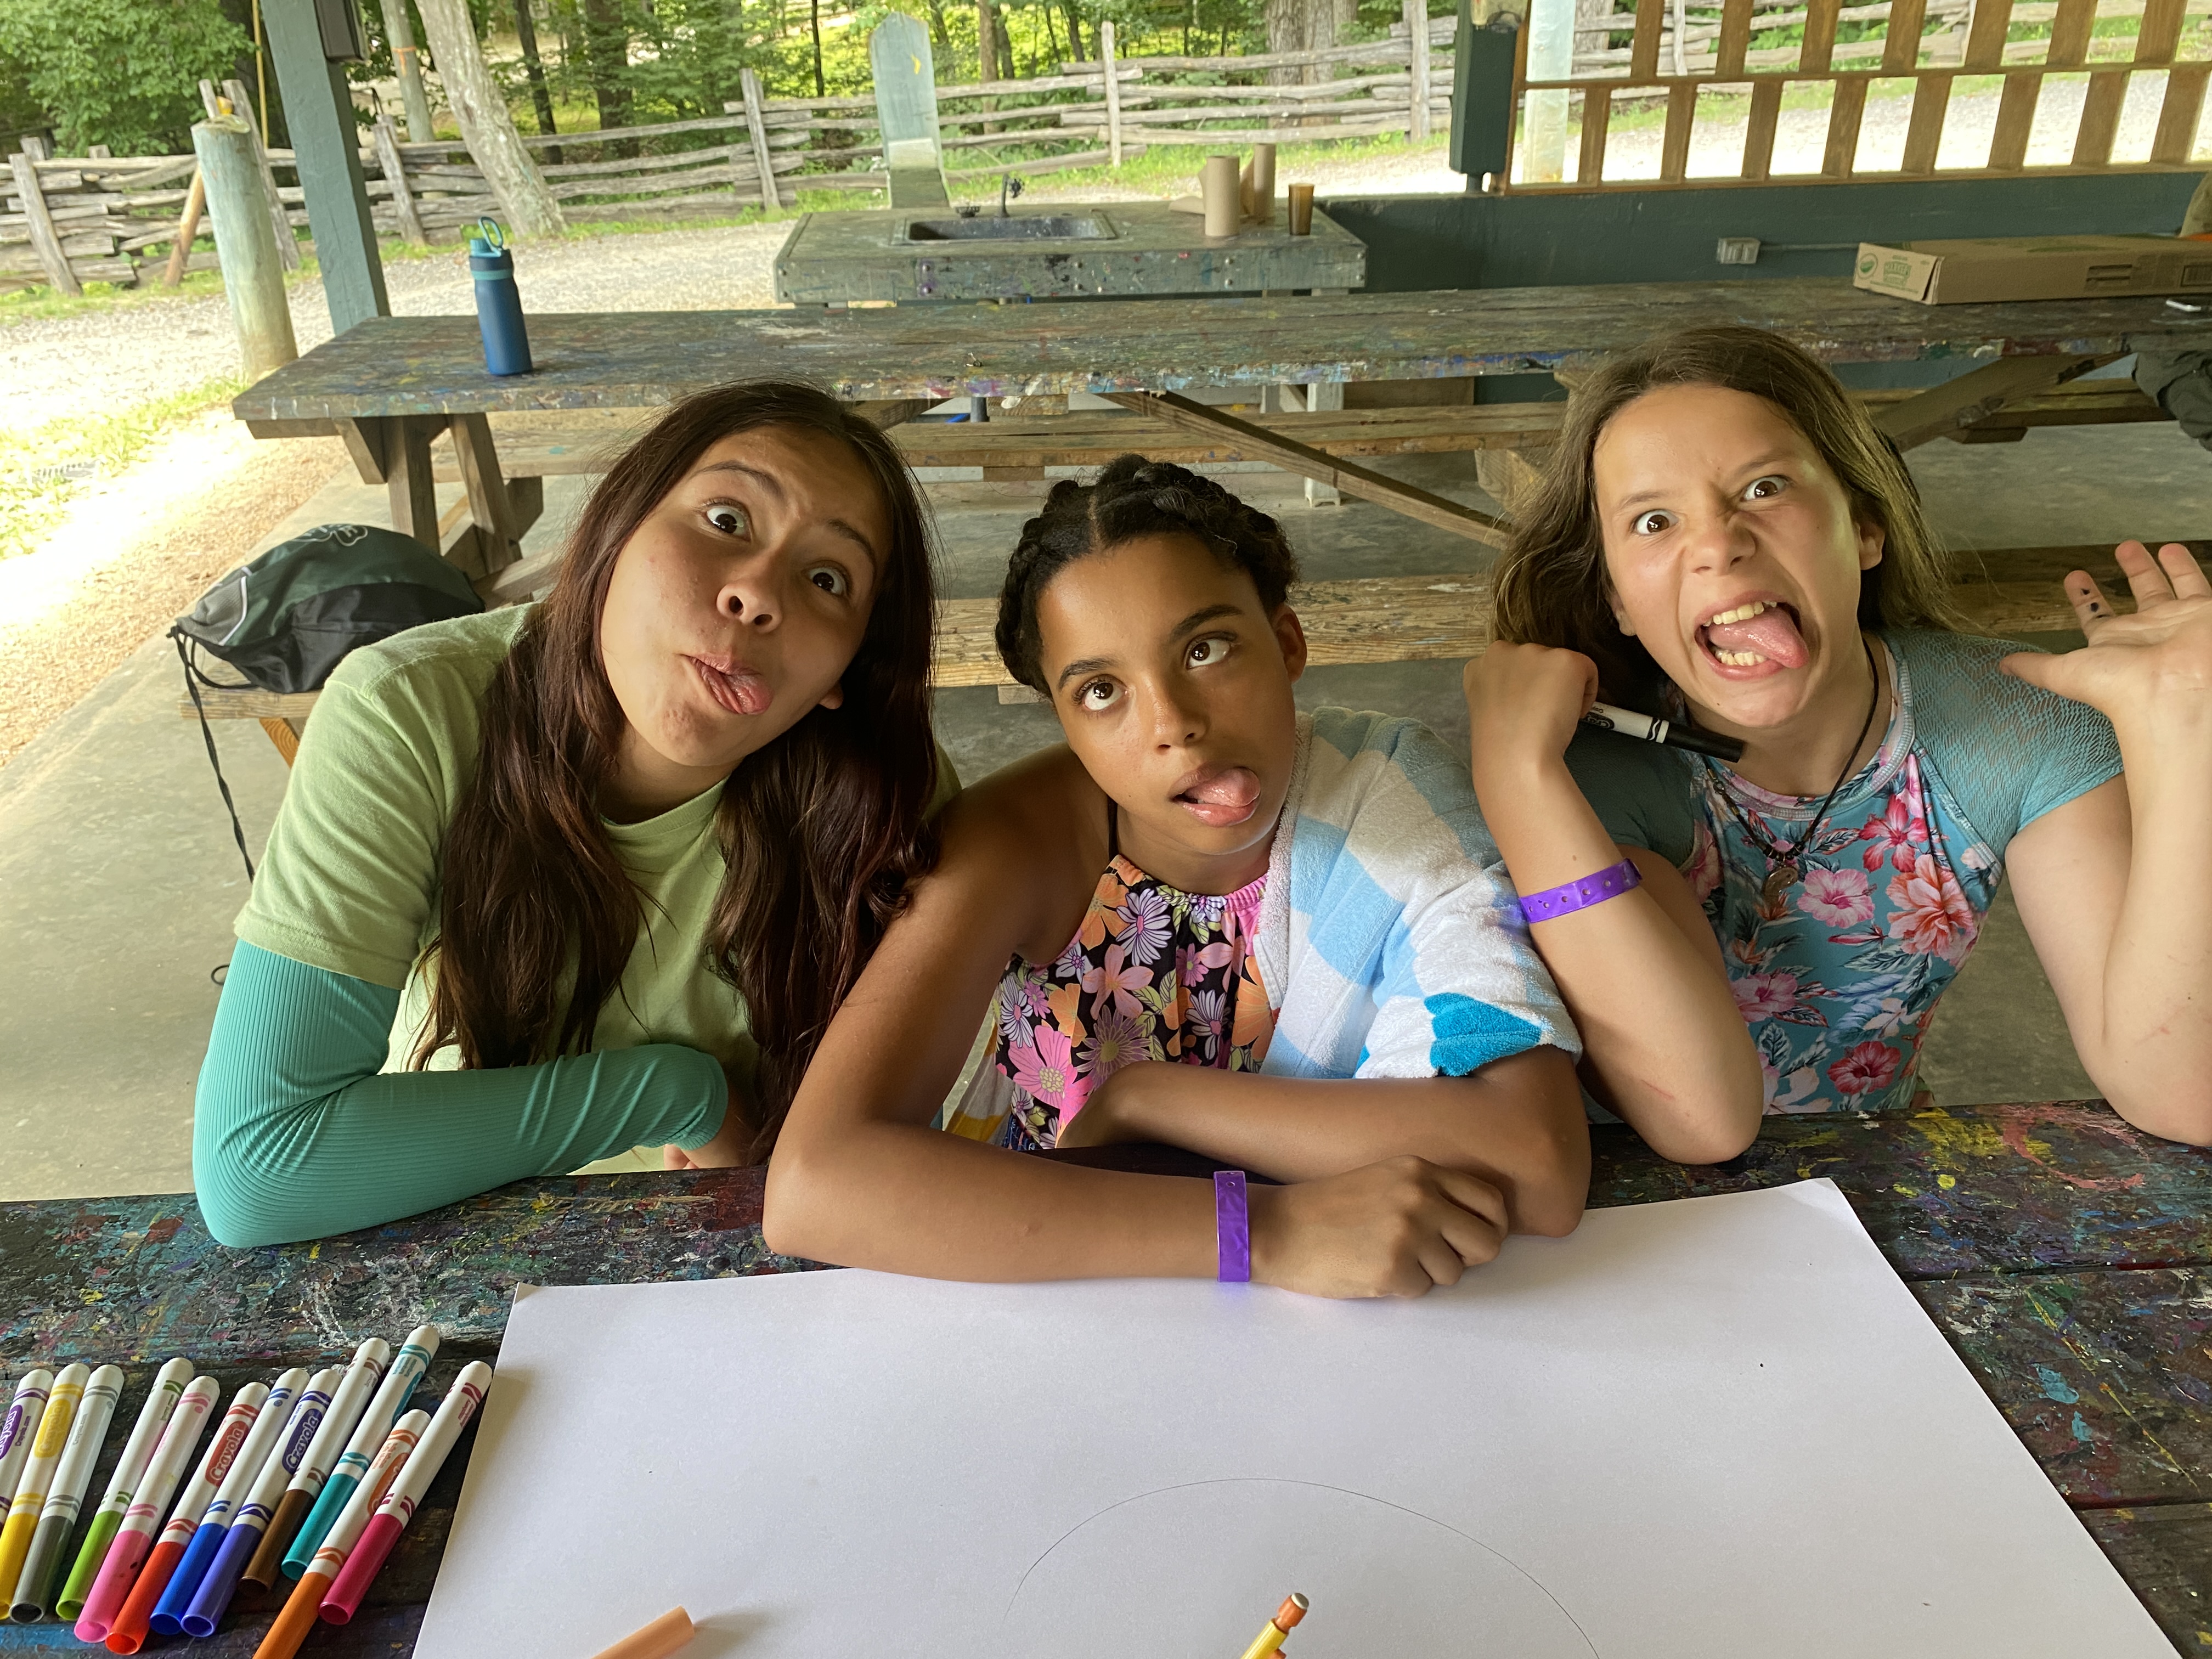 Three youth sitting at a picnic table making silly faces.